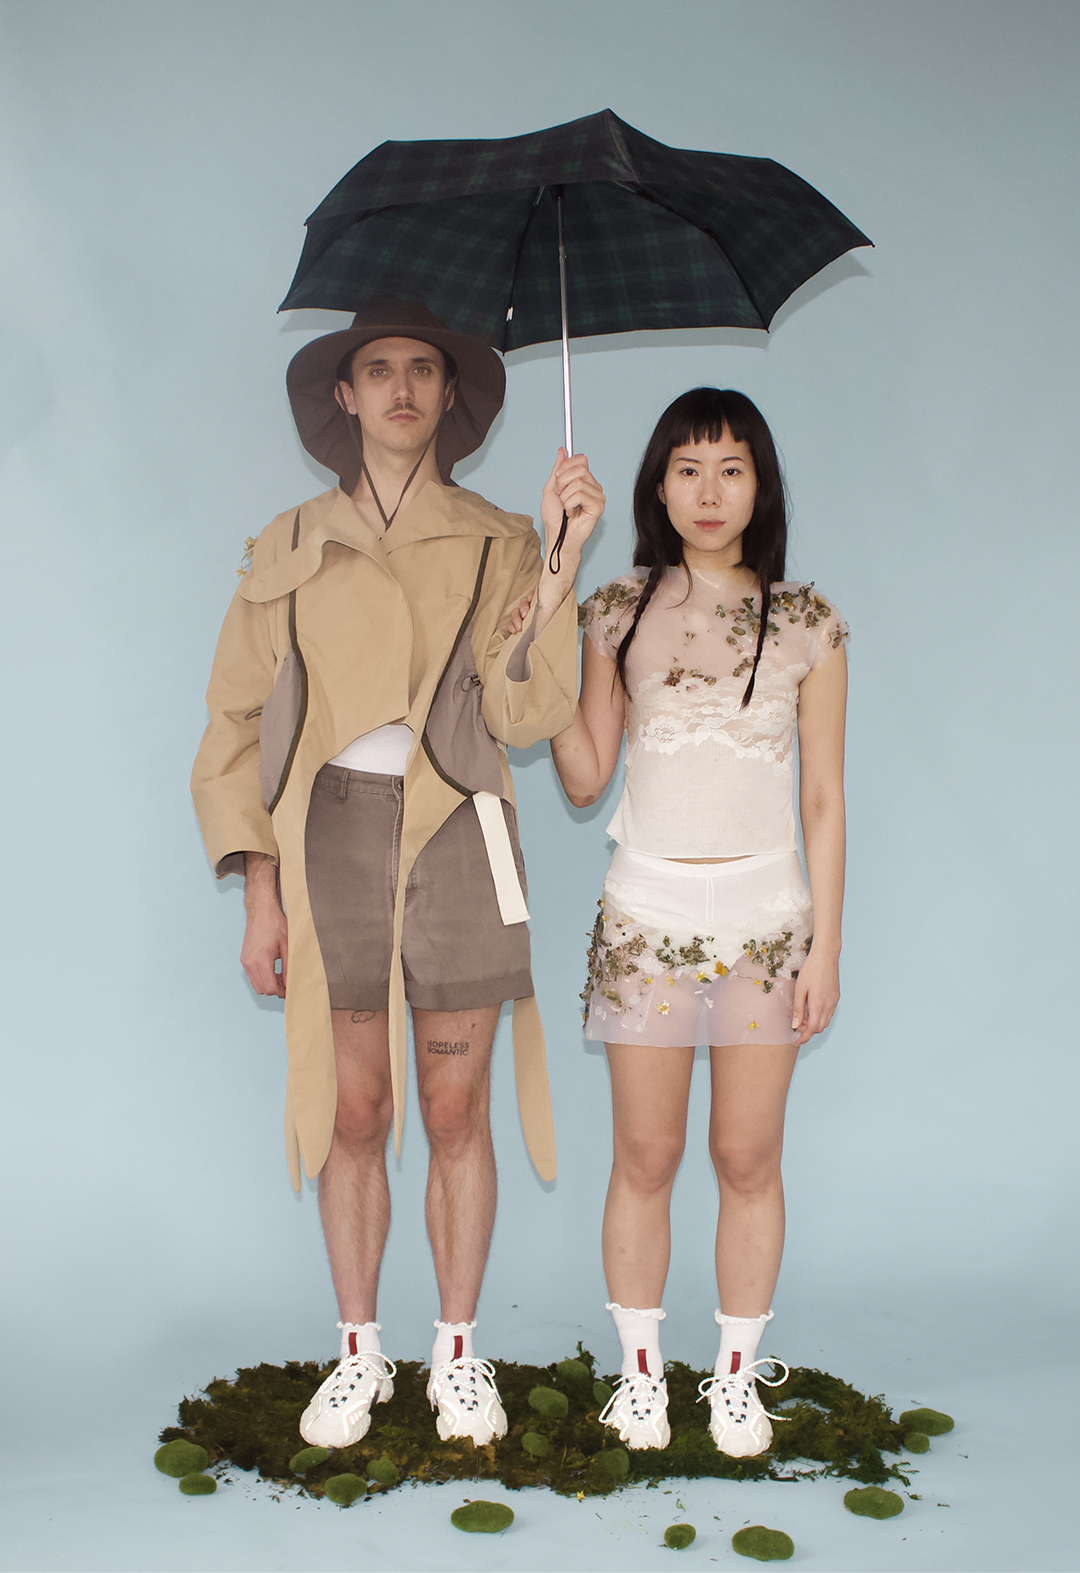 The couple share an umbrella while standing next to each other. The male model holds the umbrella while the female model rests her right hand on his left arm.